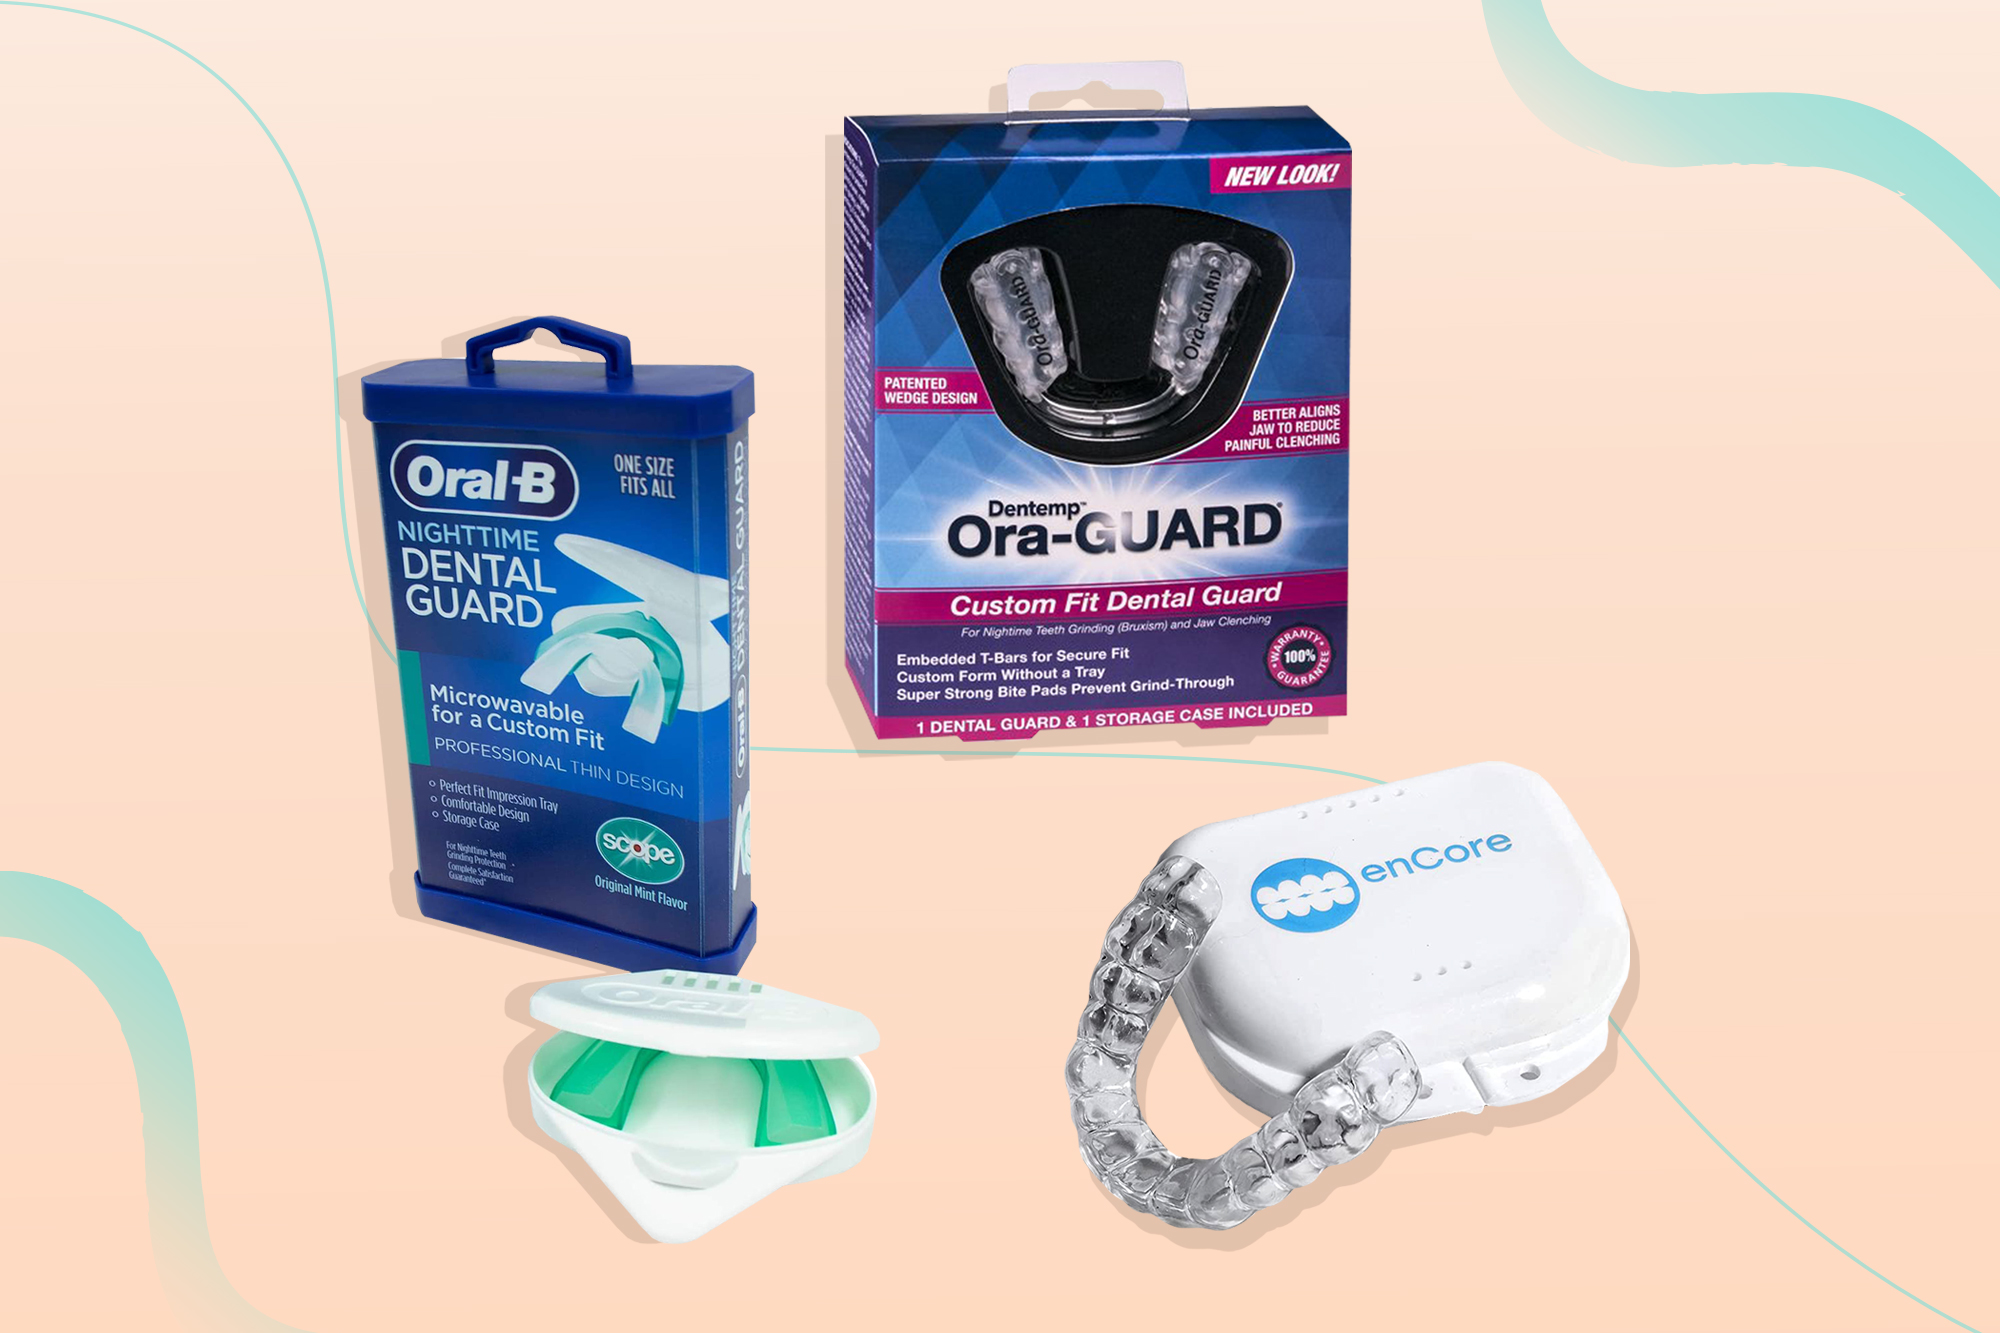 Soft Night Guard for Teeth Grinding & Clenching